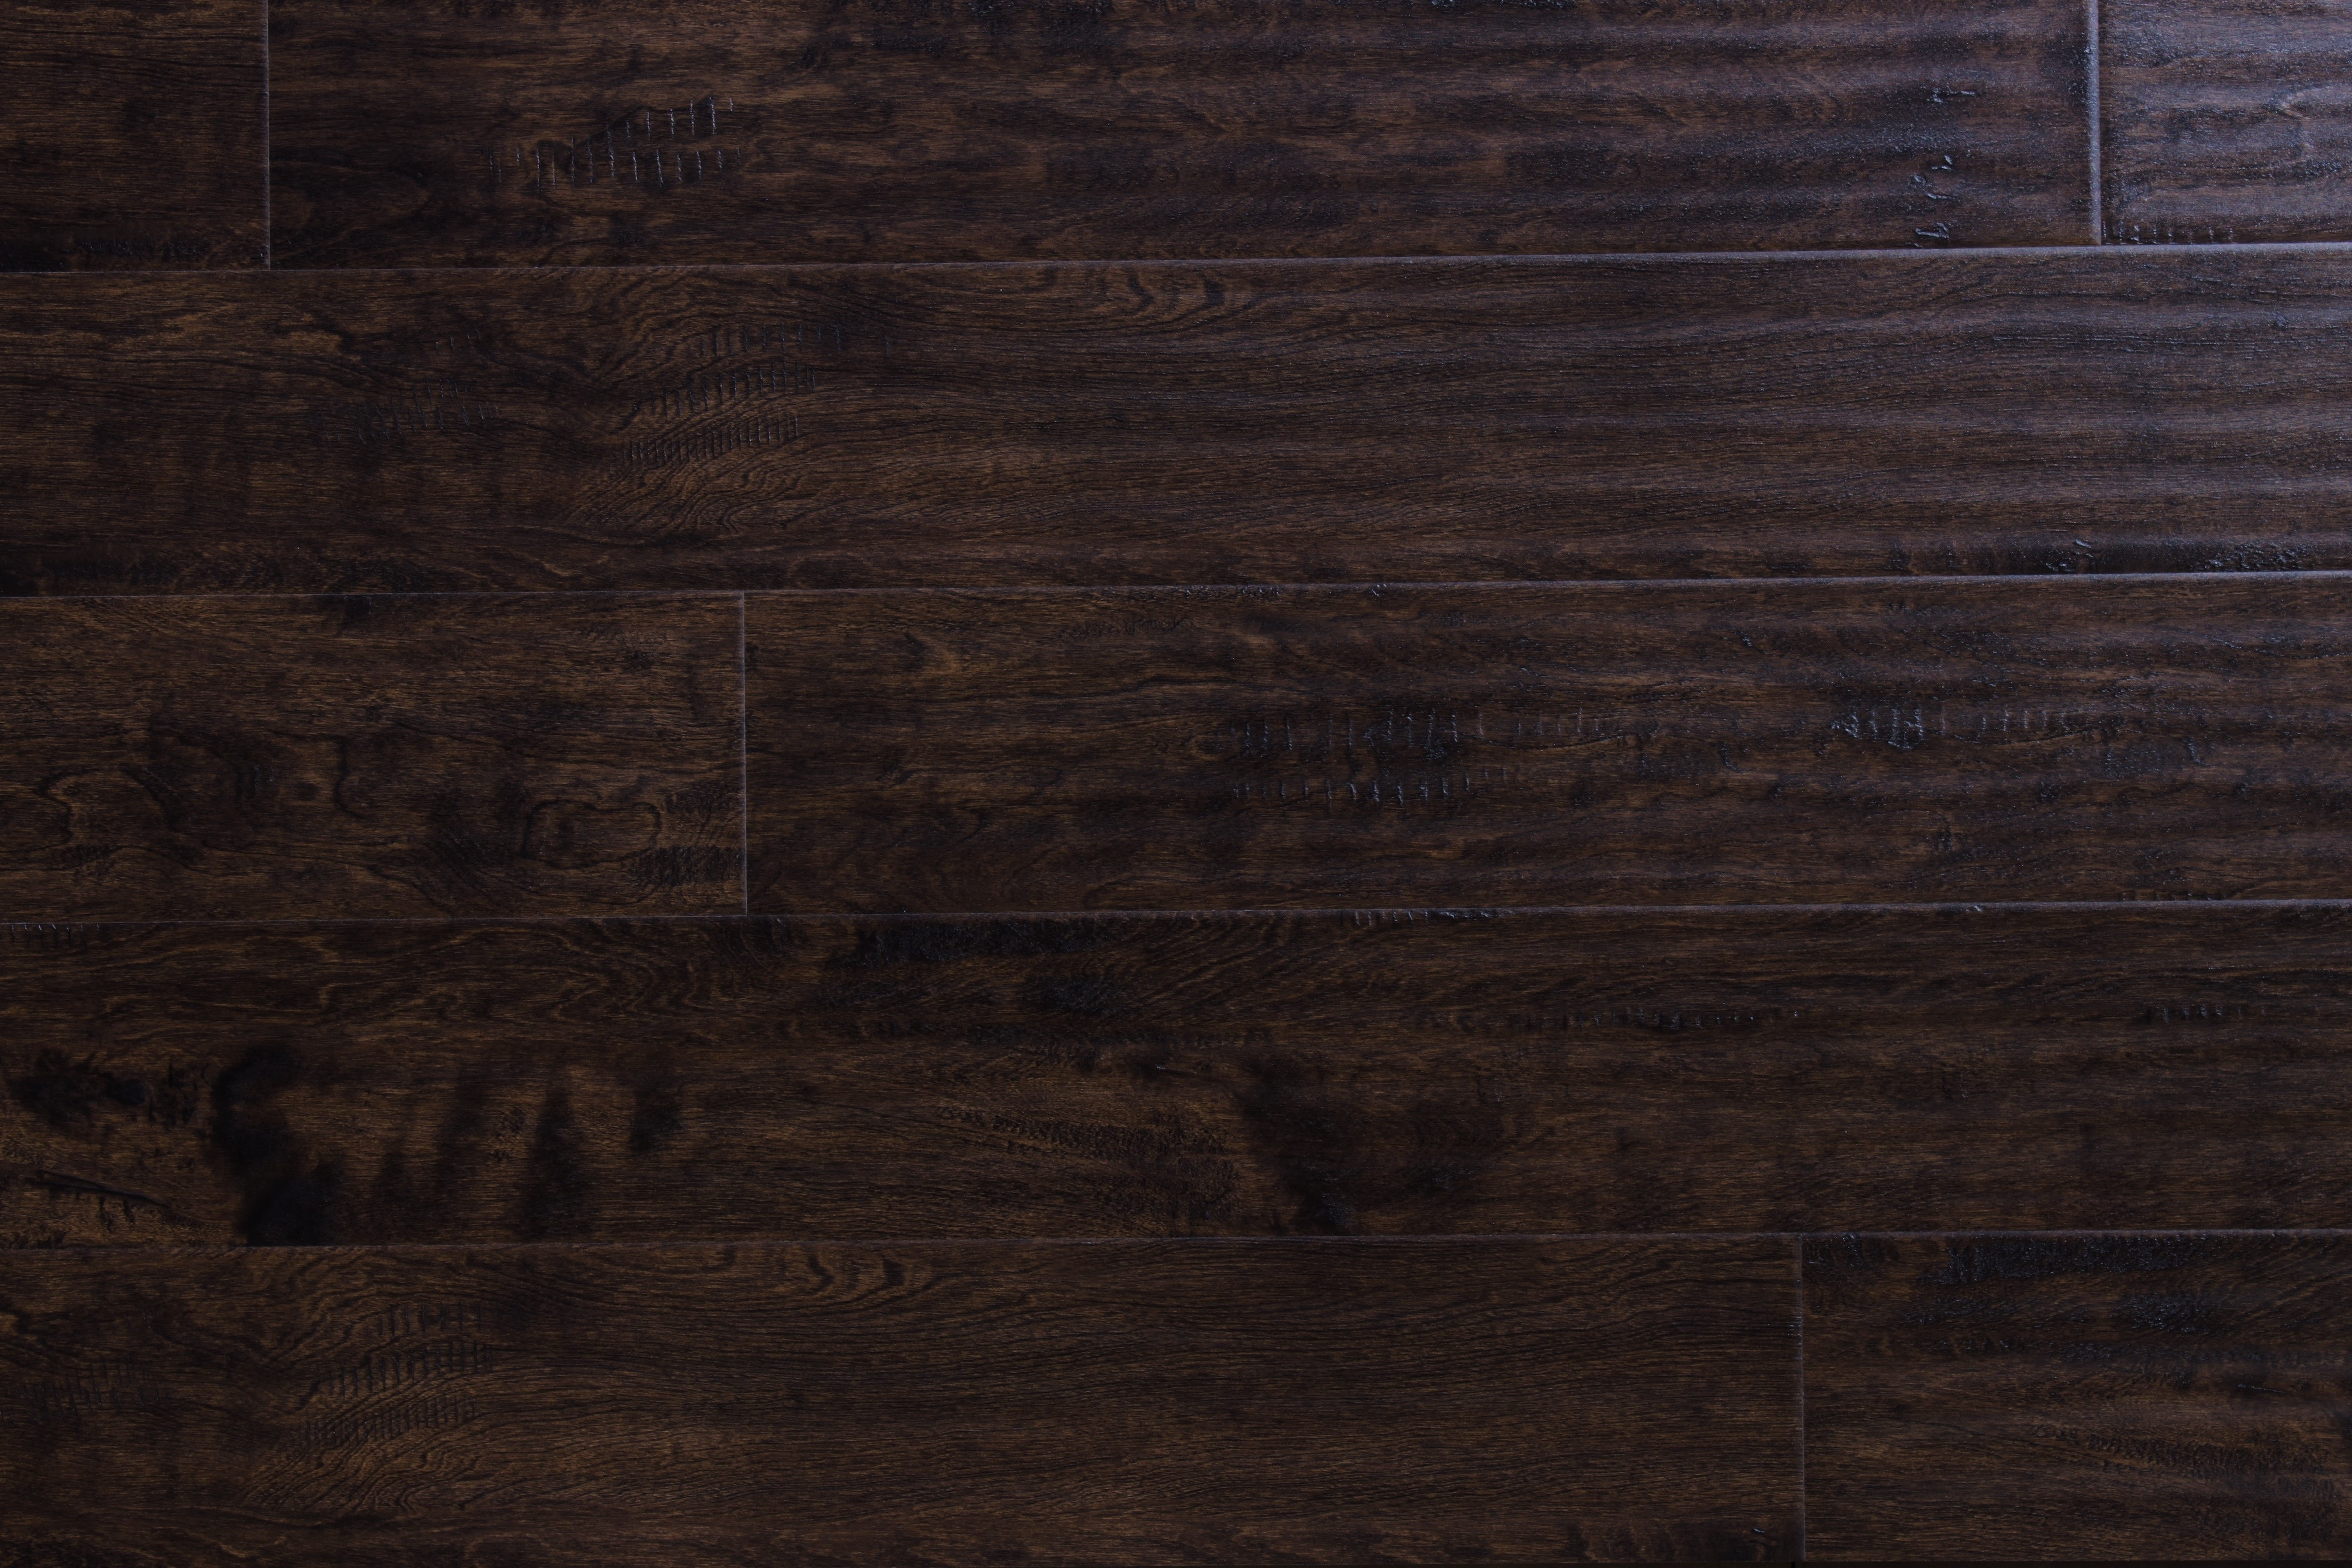 16 Awesome Texas Hardwood Flooring Reviews 2024 free download texas hardwood flooring reviews of wood flooring free samples available at builddirecta throughout tailor multi gb 5874277bb8d3c